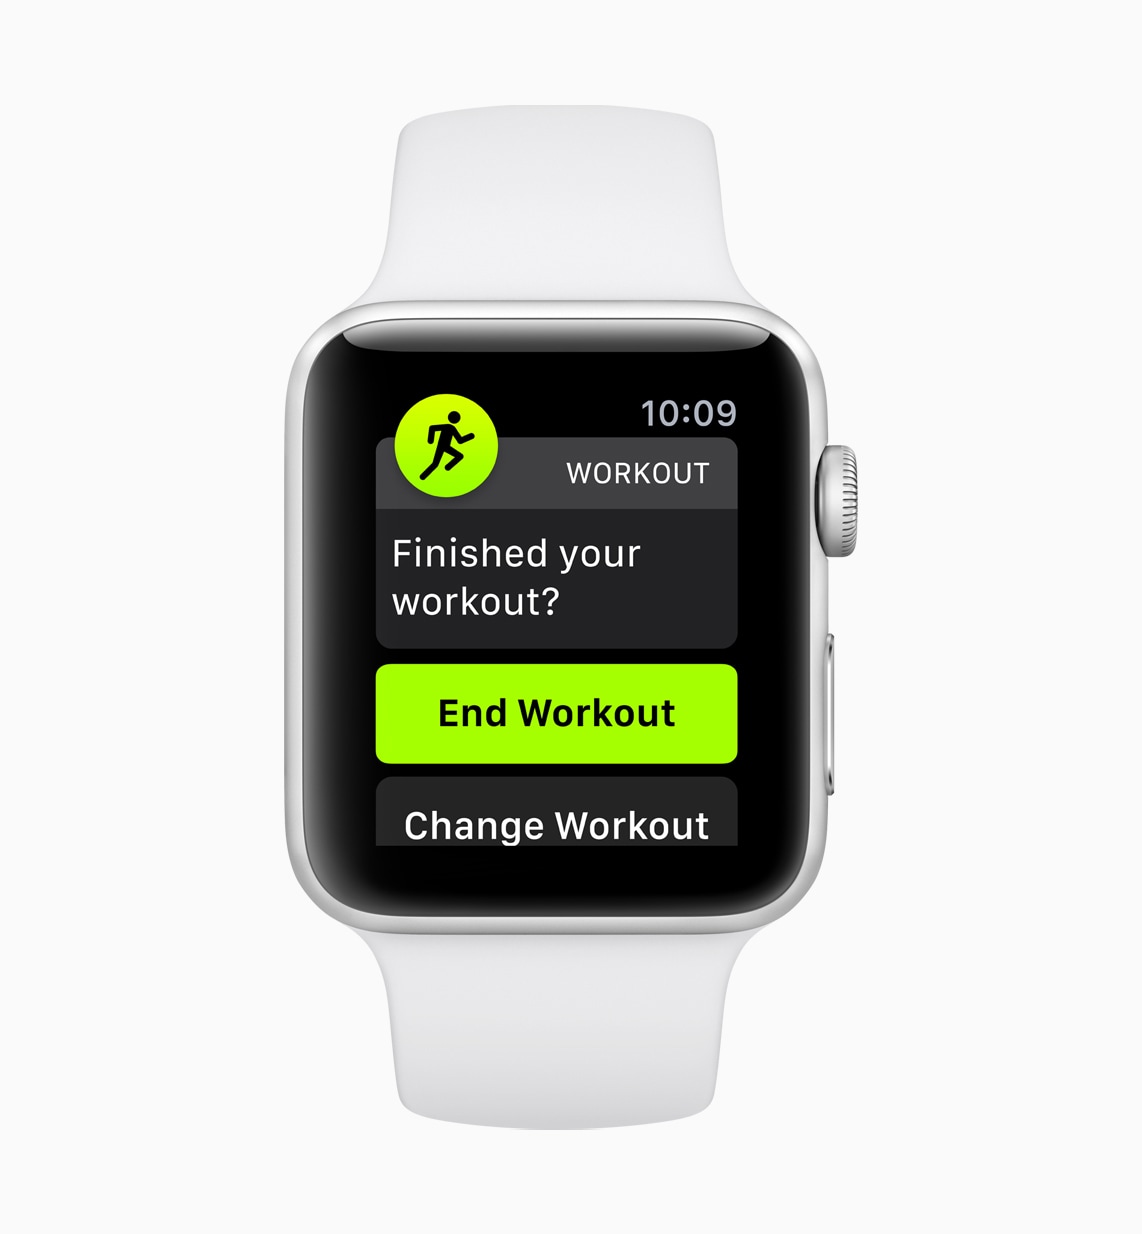 Automatic exercise detection on watchOS 5